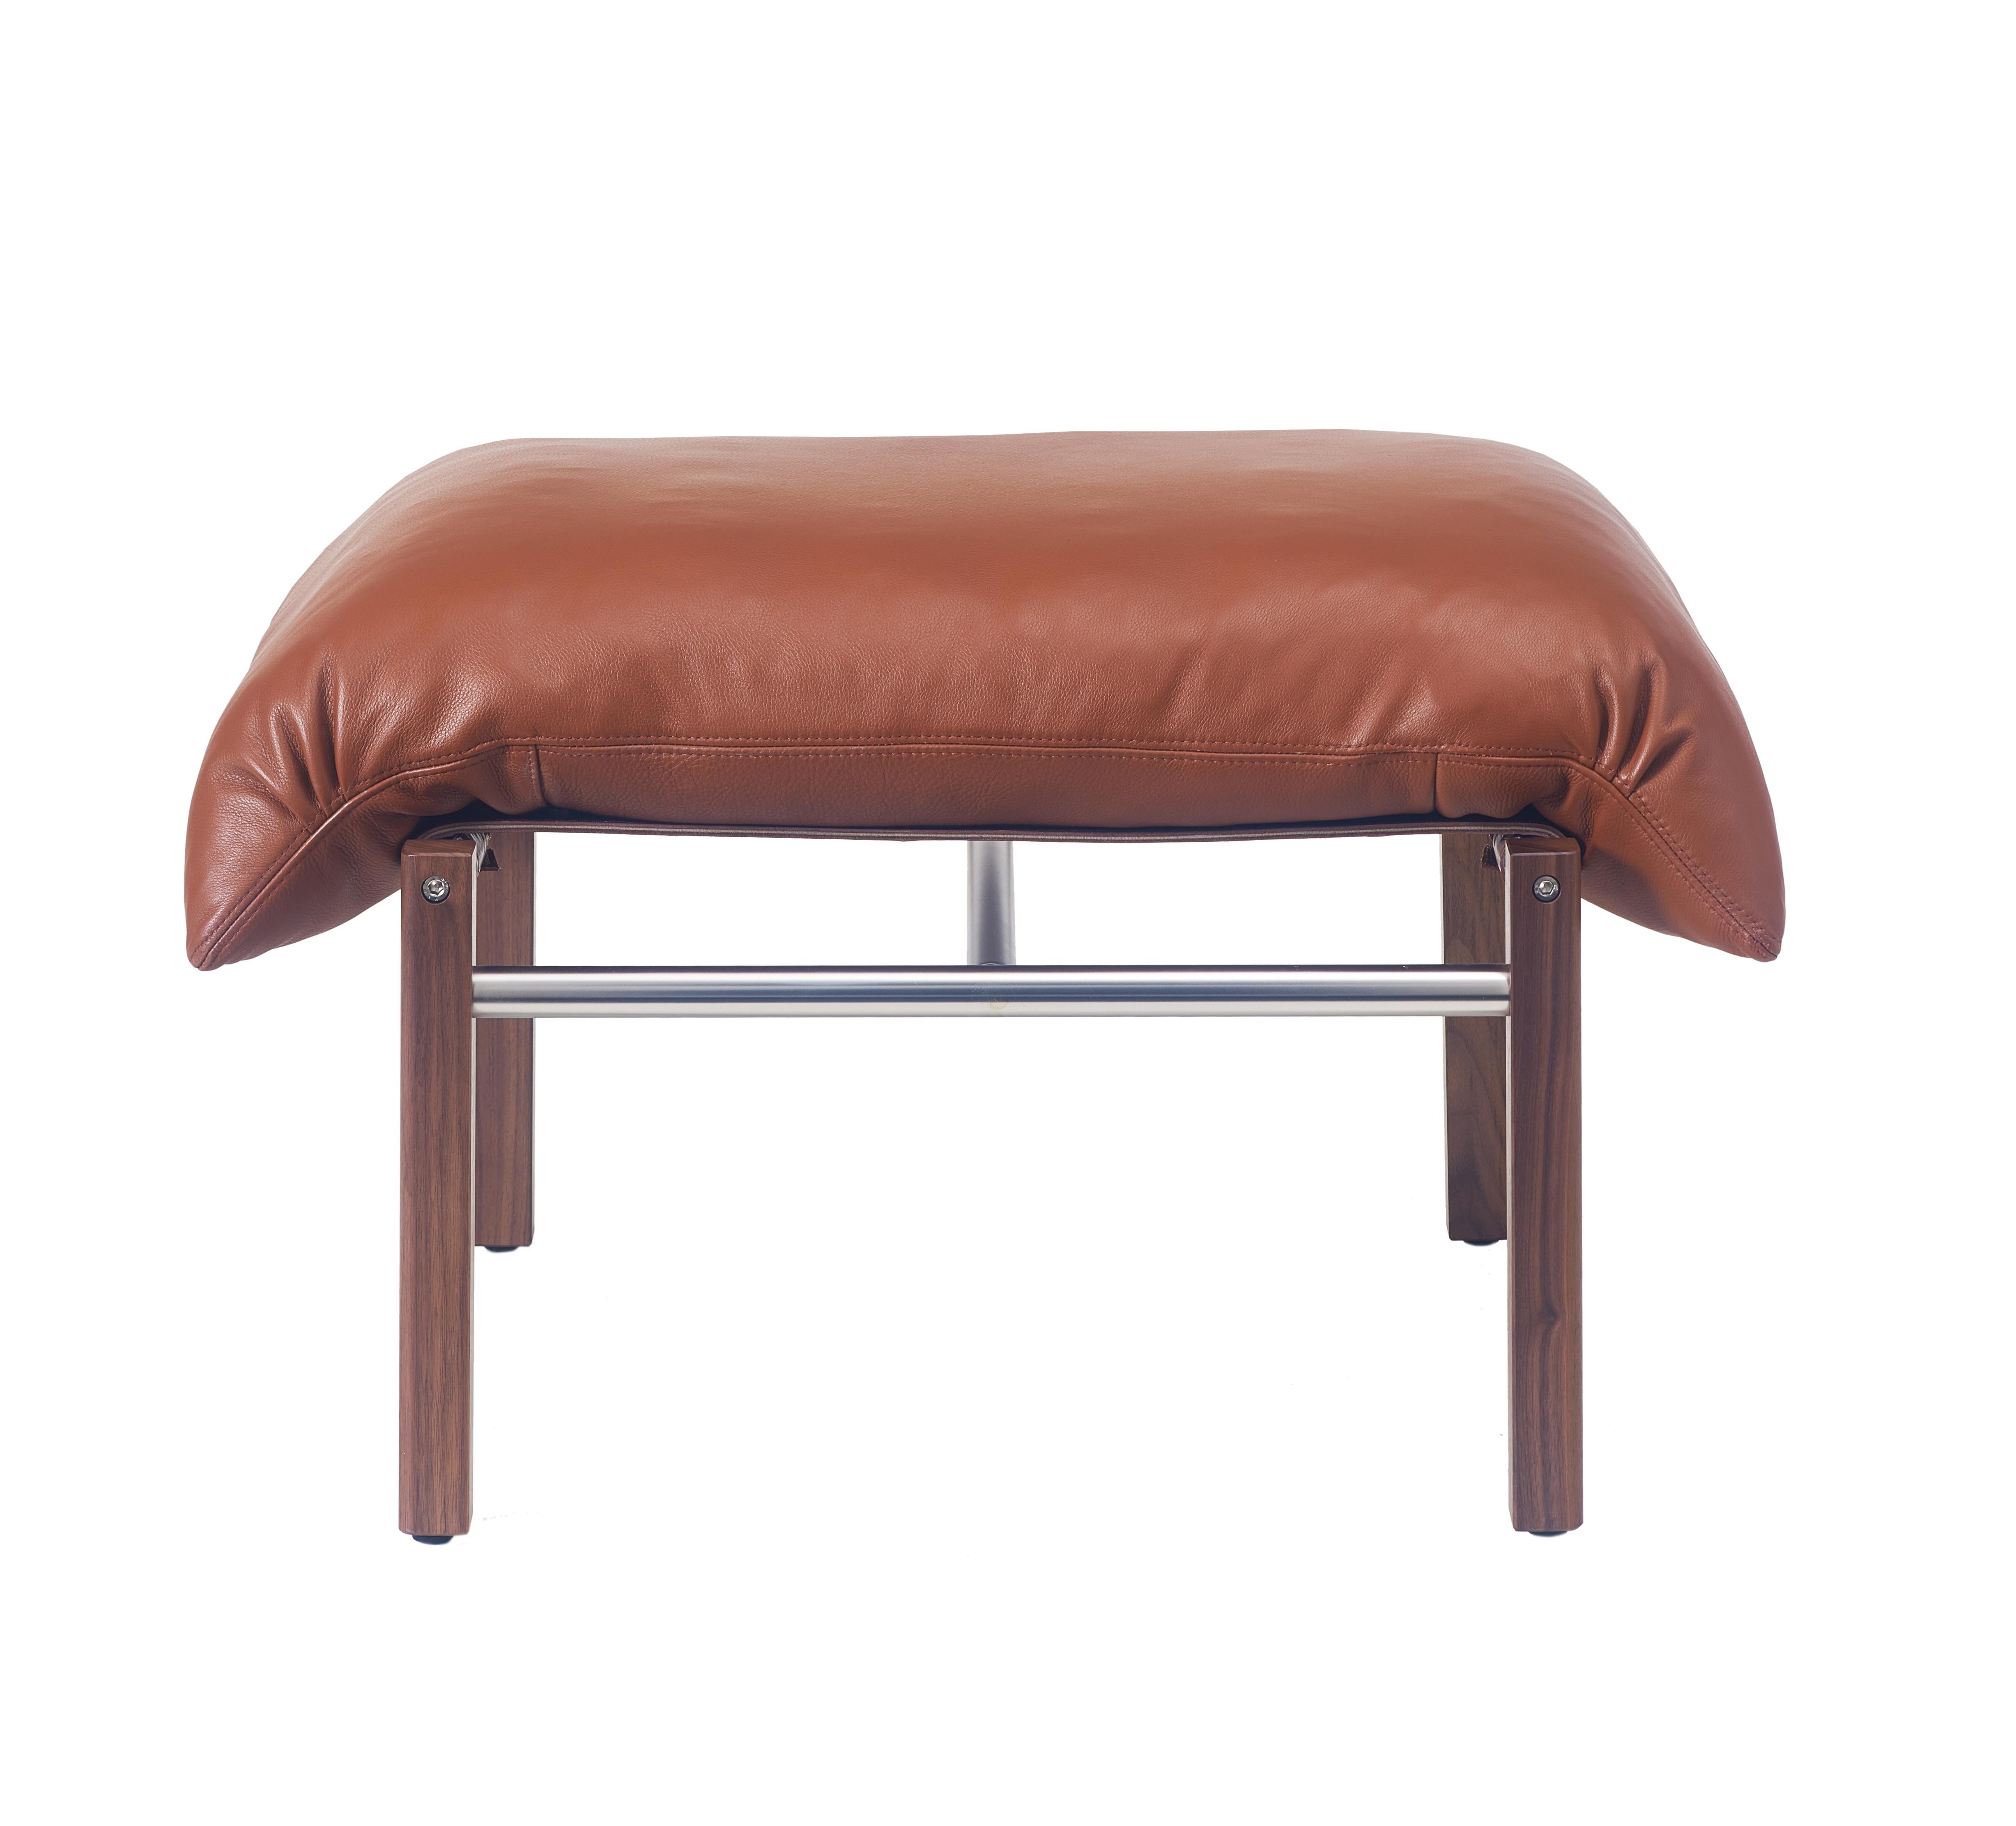 For Sale: Brown (Comfort 33286 Chestnut Brown) Sling Ottoman in Solid Walnut, Satin Nickel and Leather Designed by Craig Bassam 3